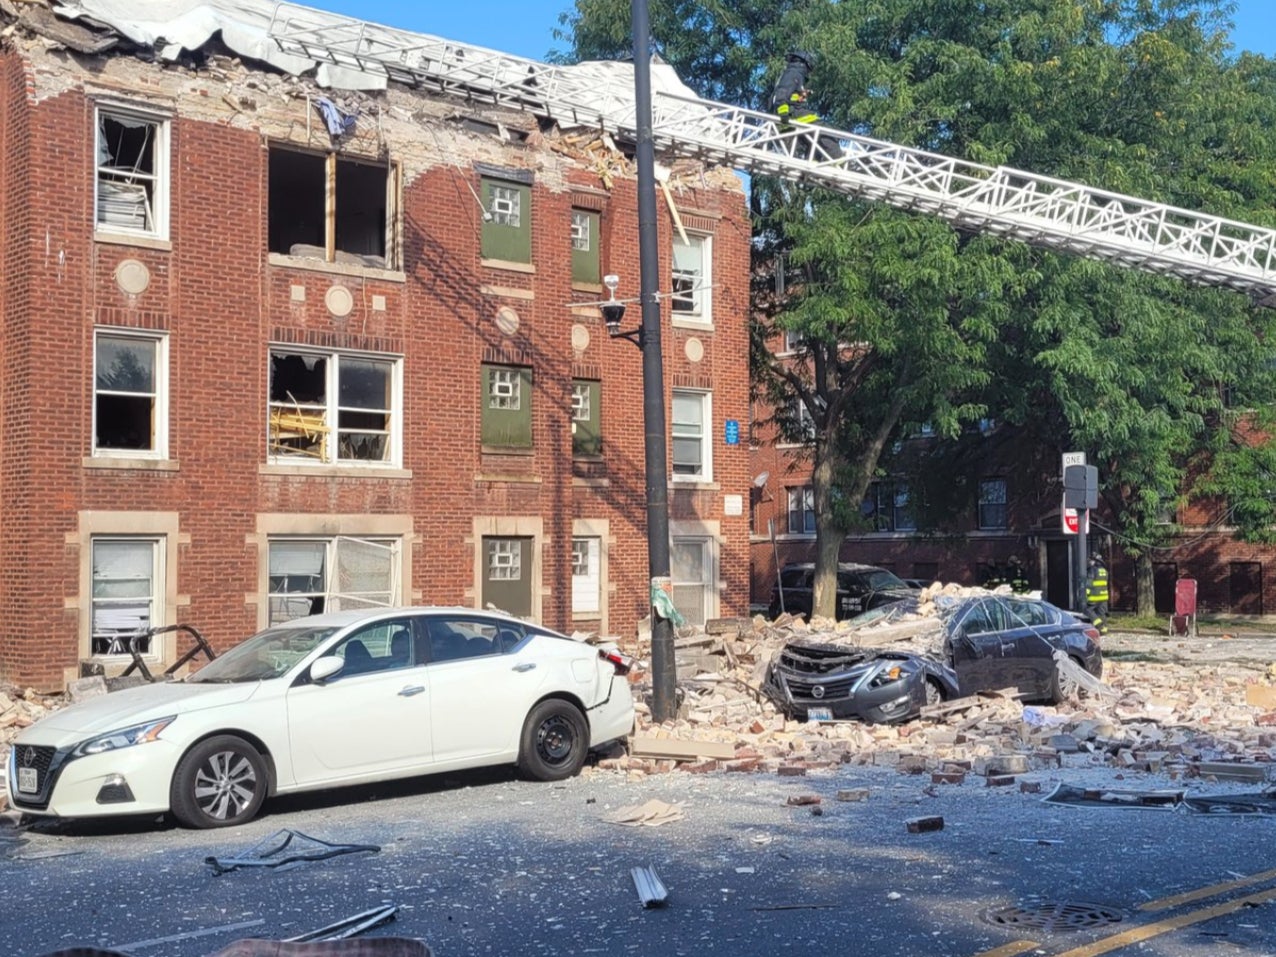 An apartment building in Chicago that exploded, injuring at least six people